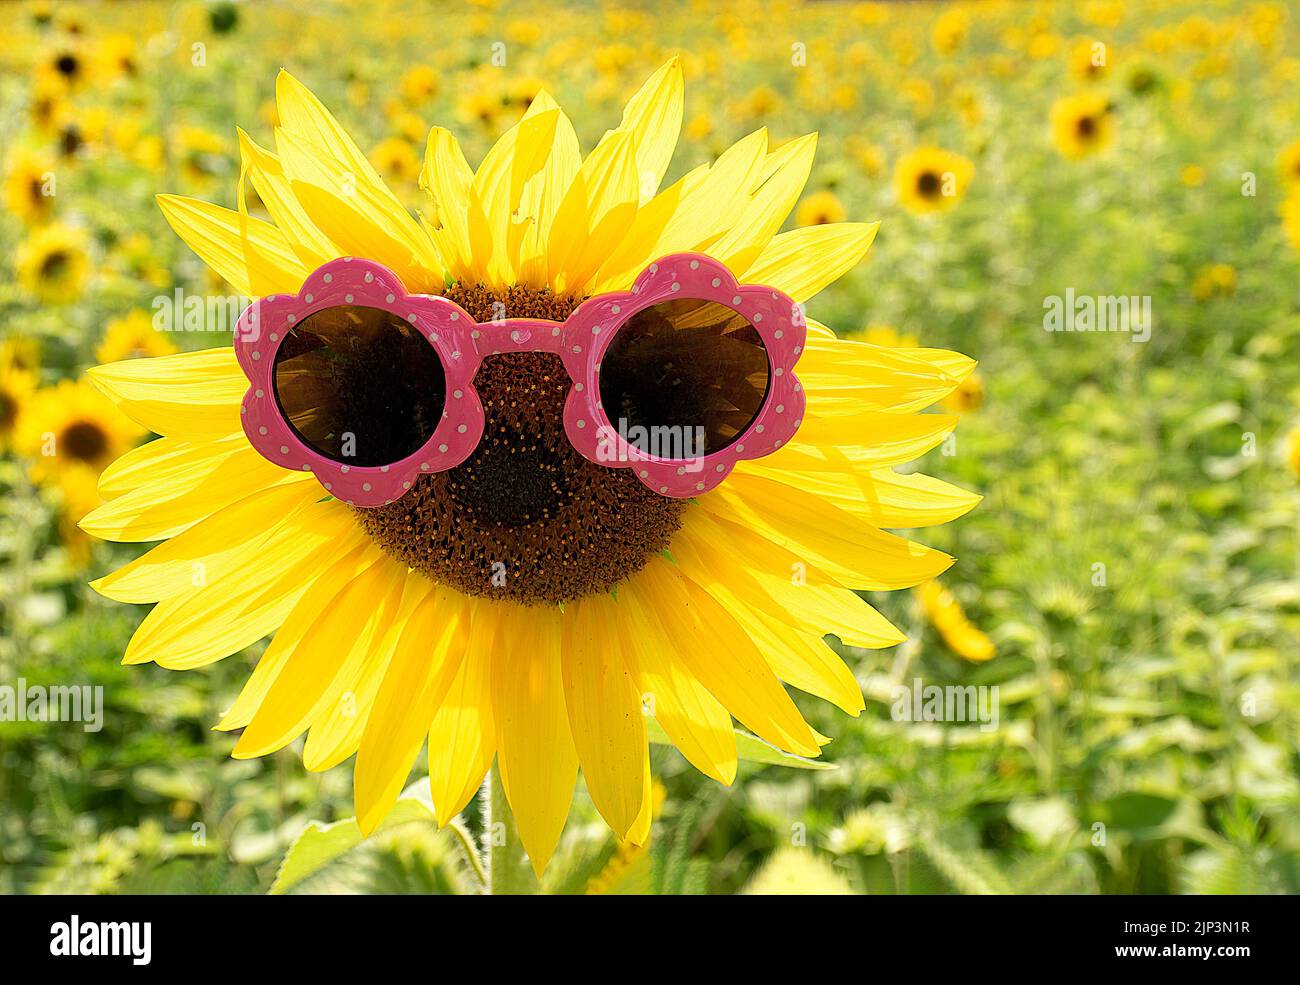 Yellow sunflower wearing pink and white polka dot sunglasses in a rural field Stock Photo